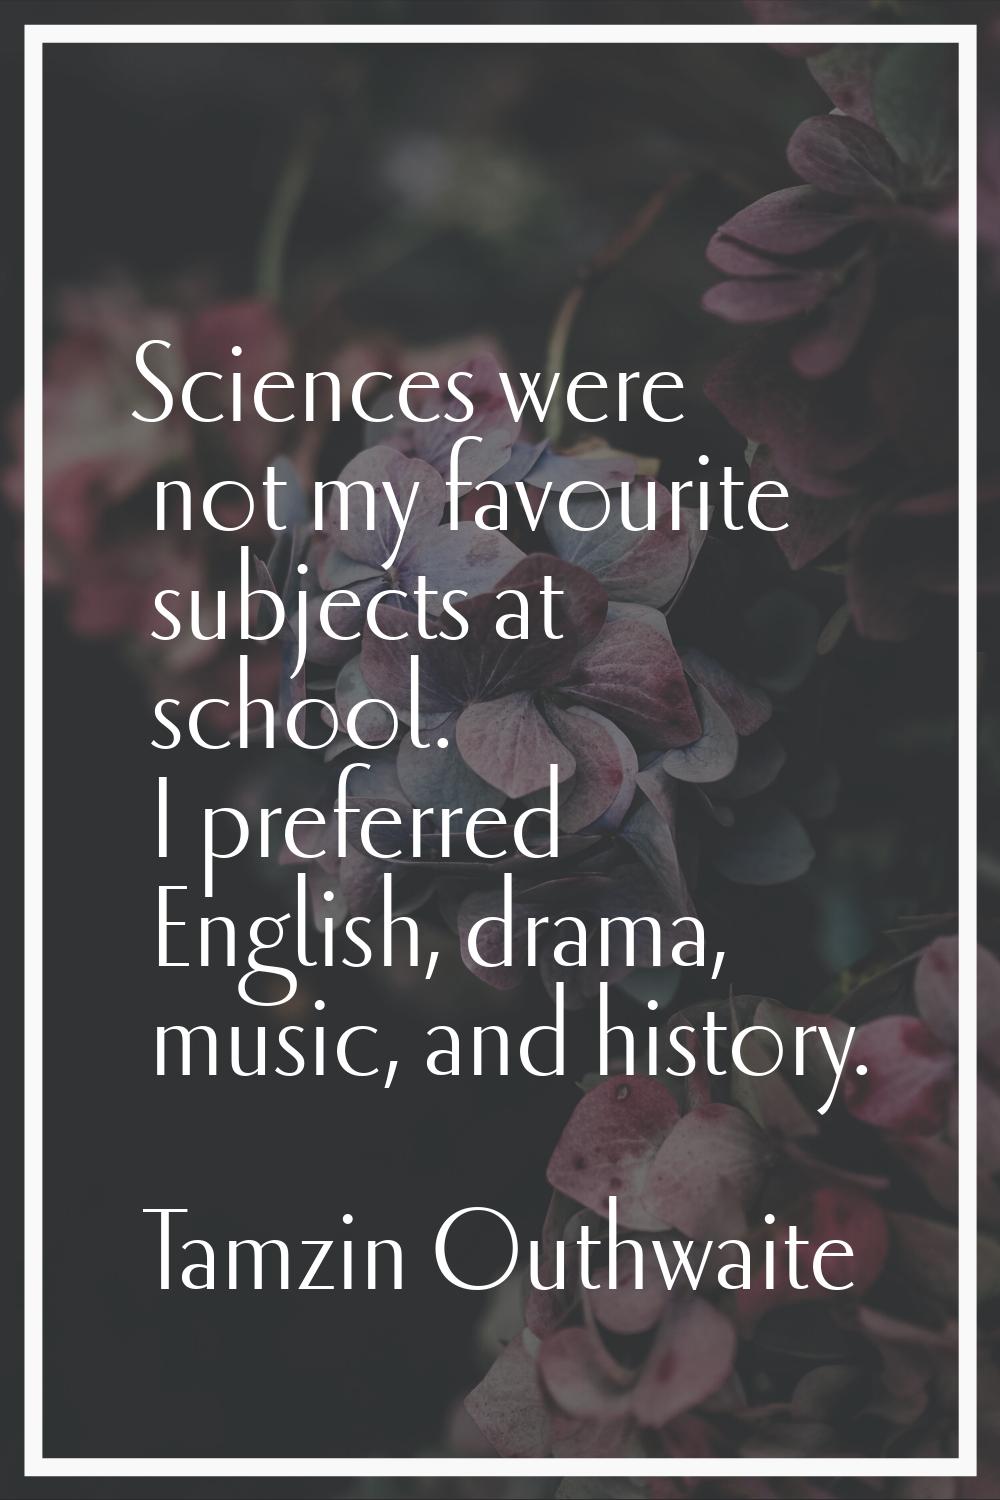 Sciences were not my favourite subjects at school. I preferred English, drama, music, and history.